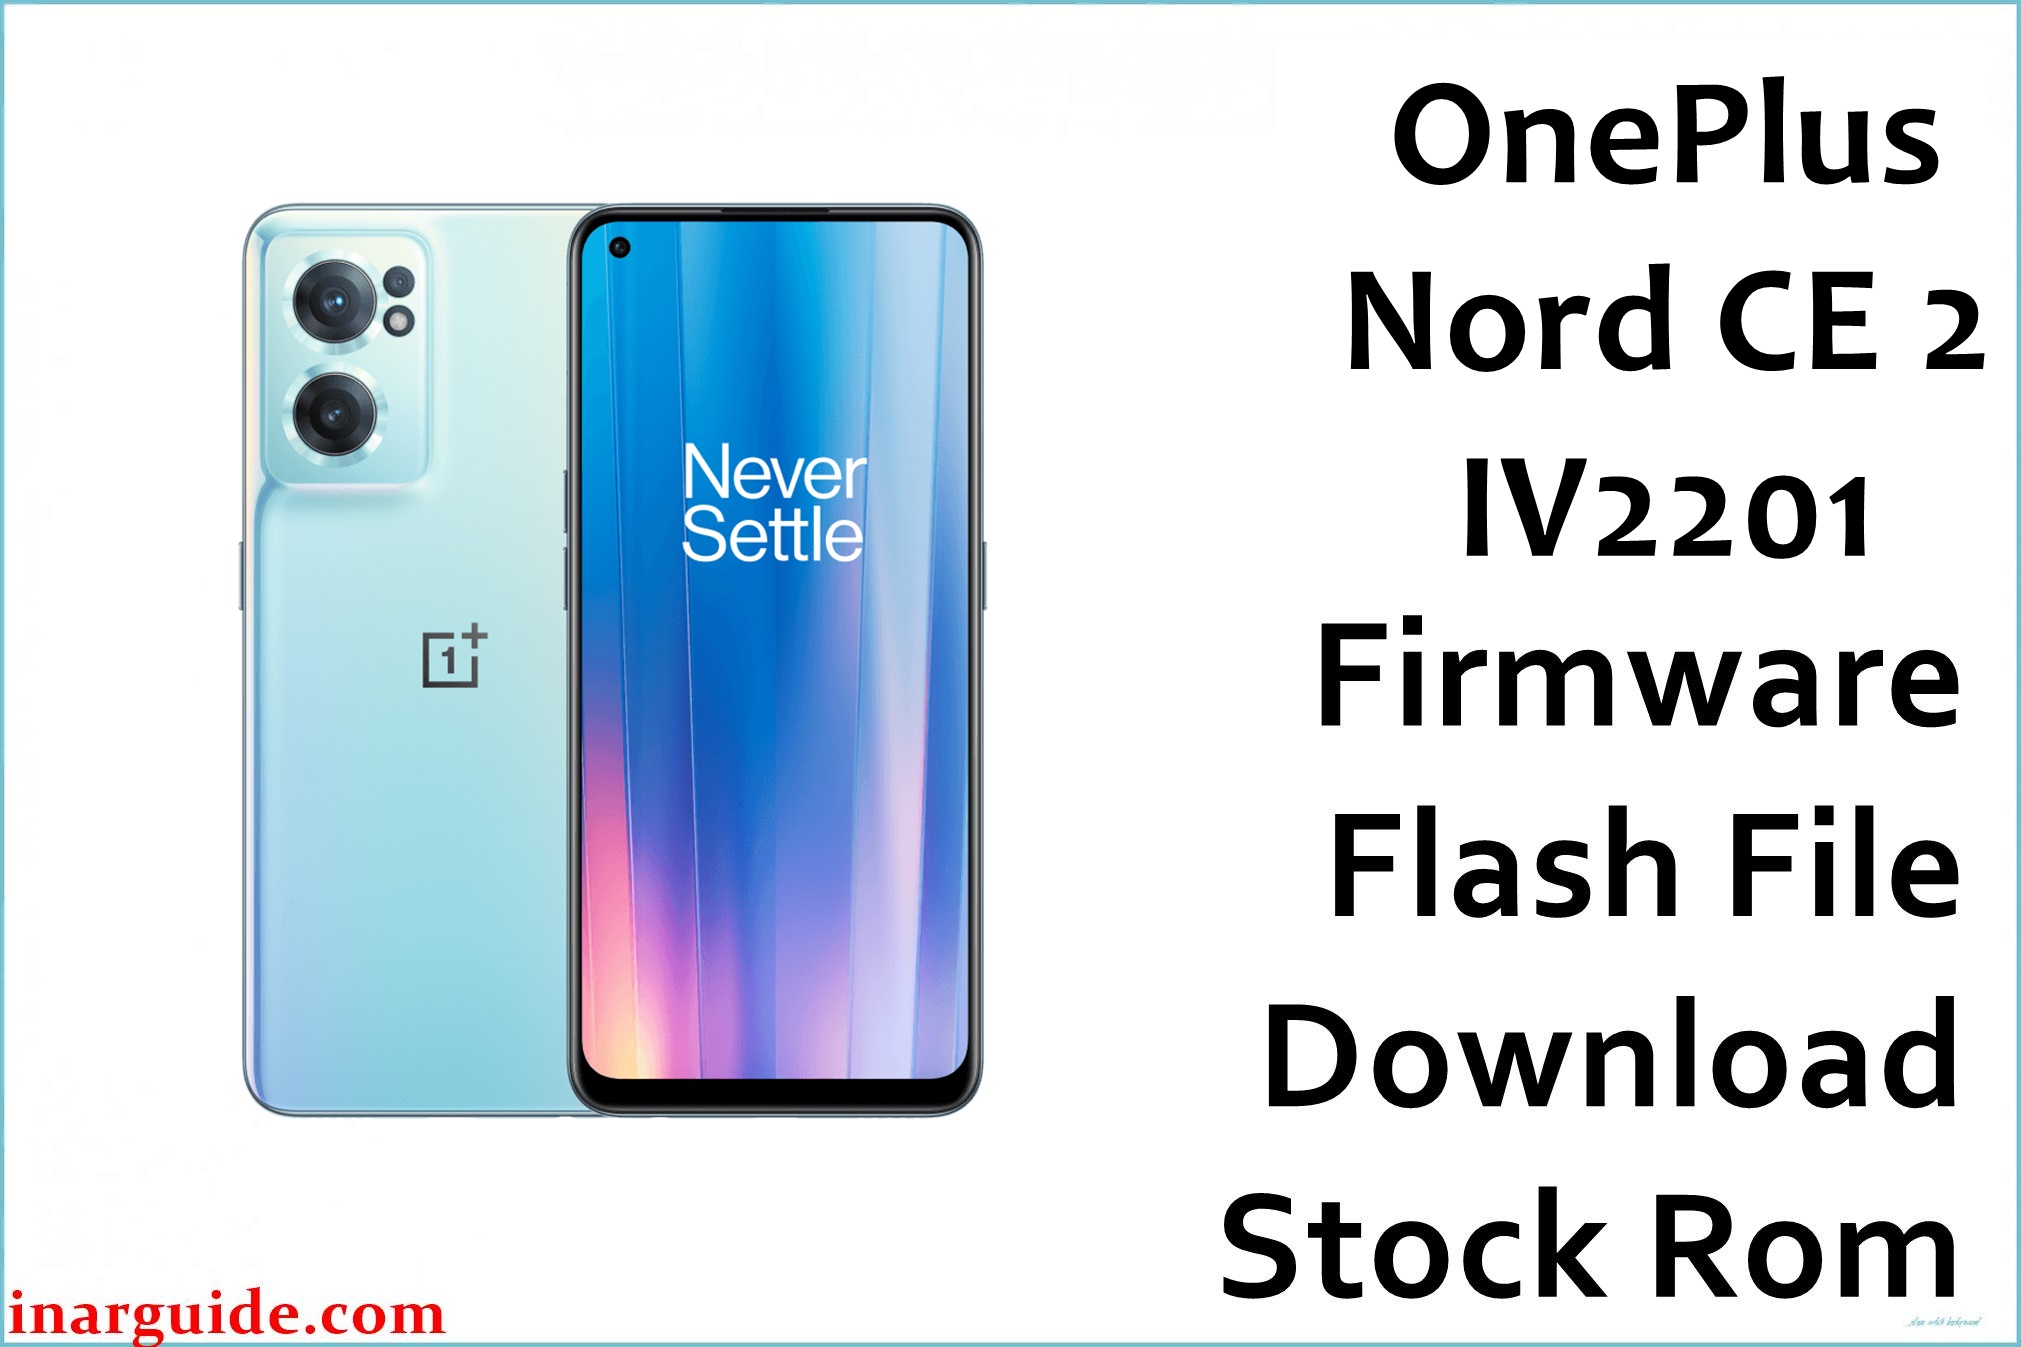 OnePlus Nord CE 2 IV2201